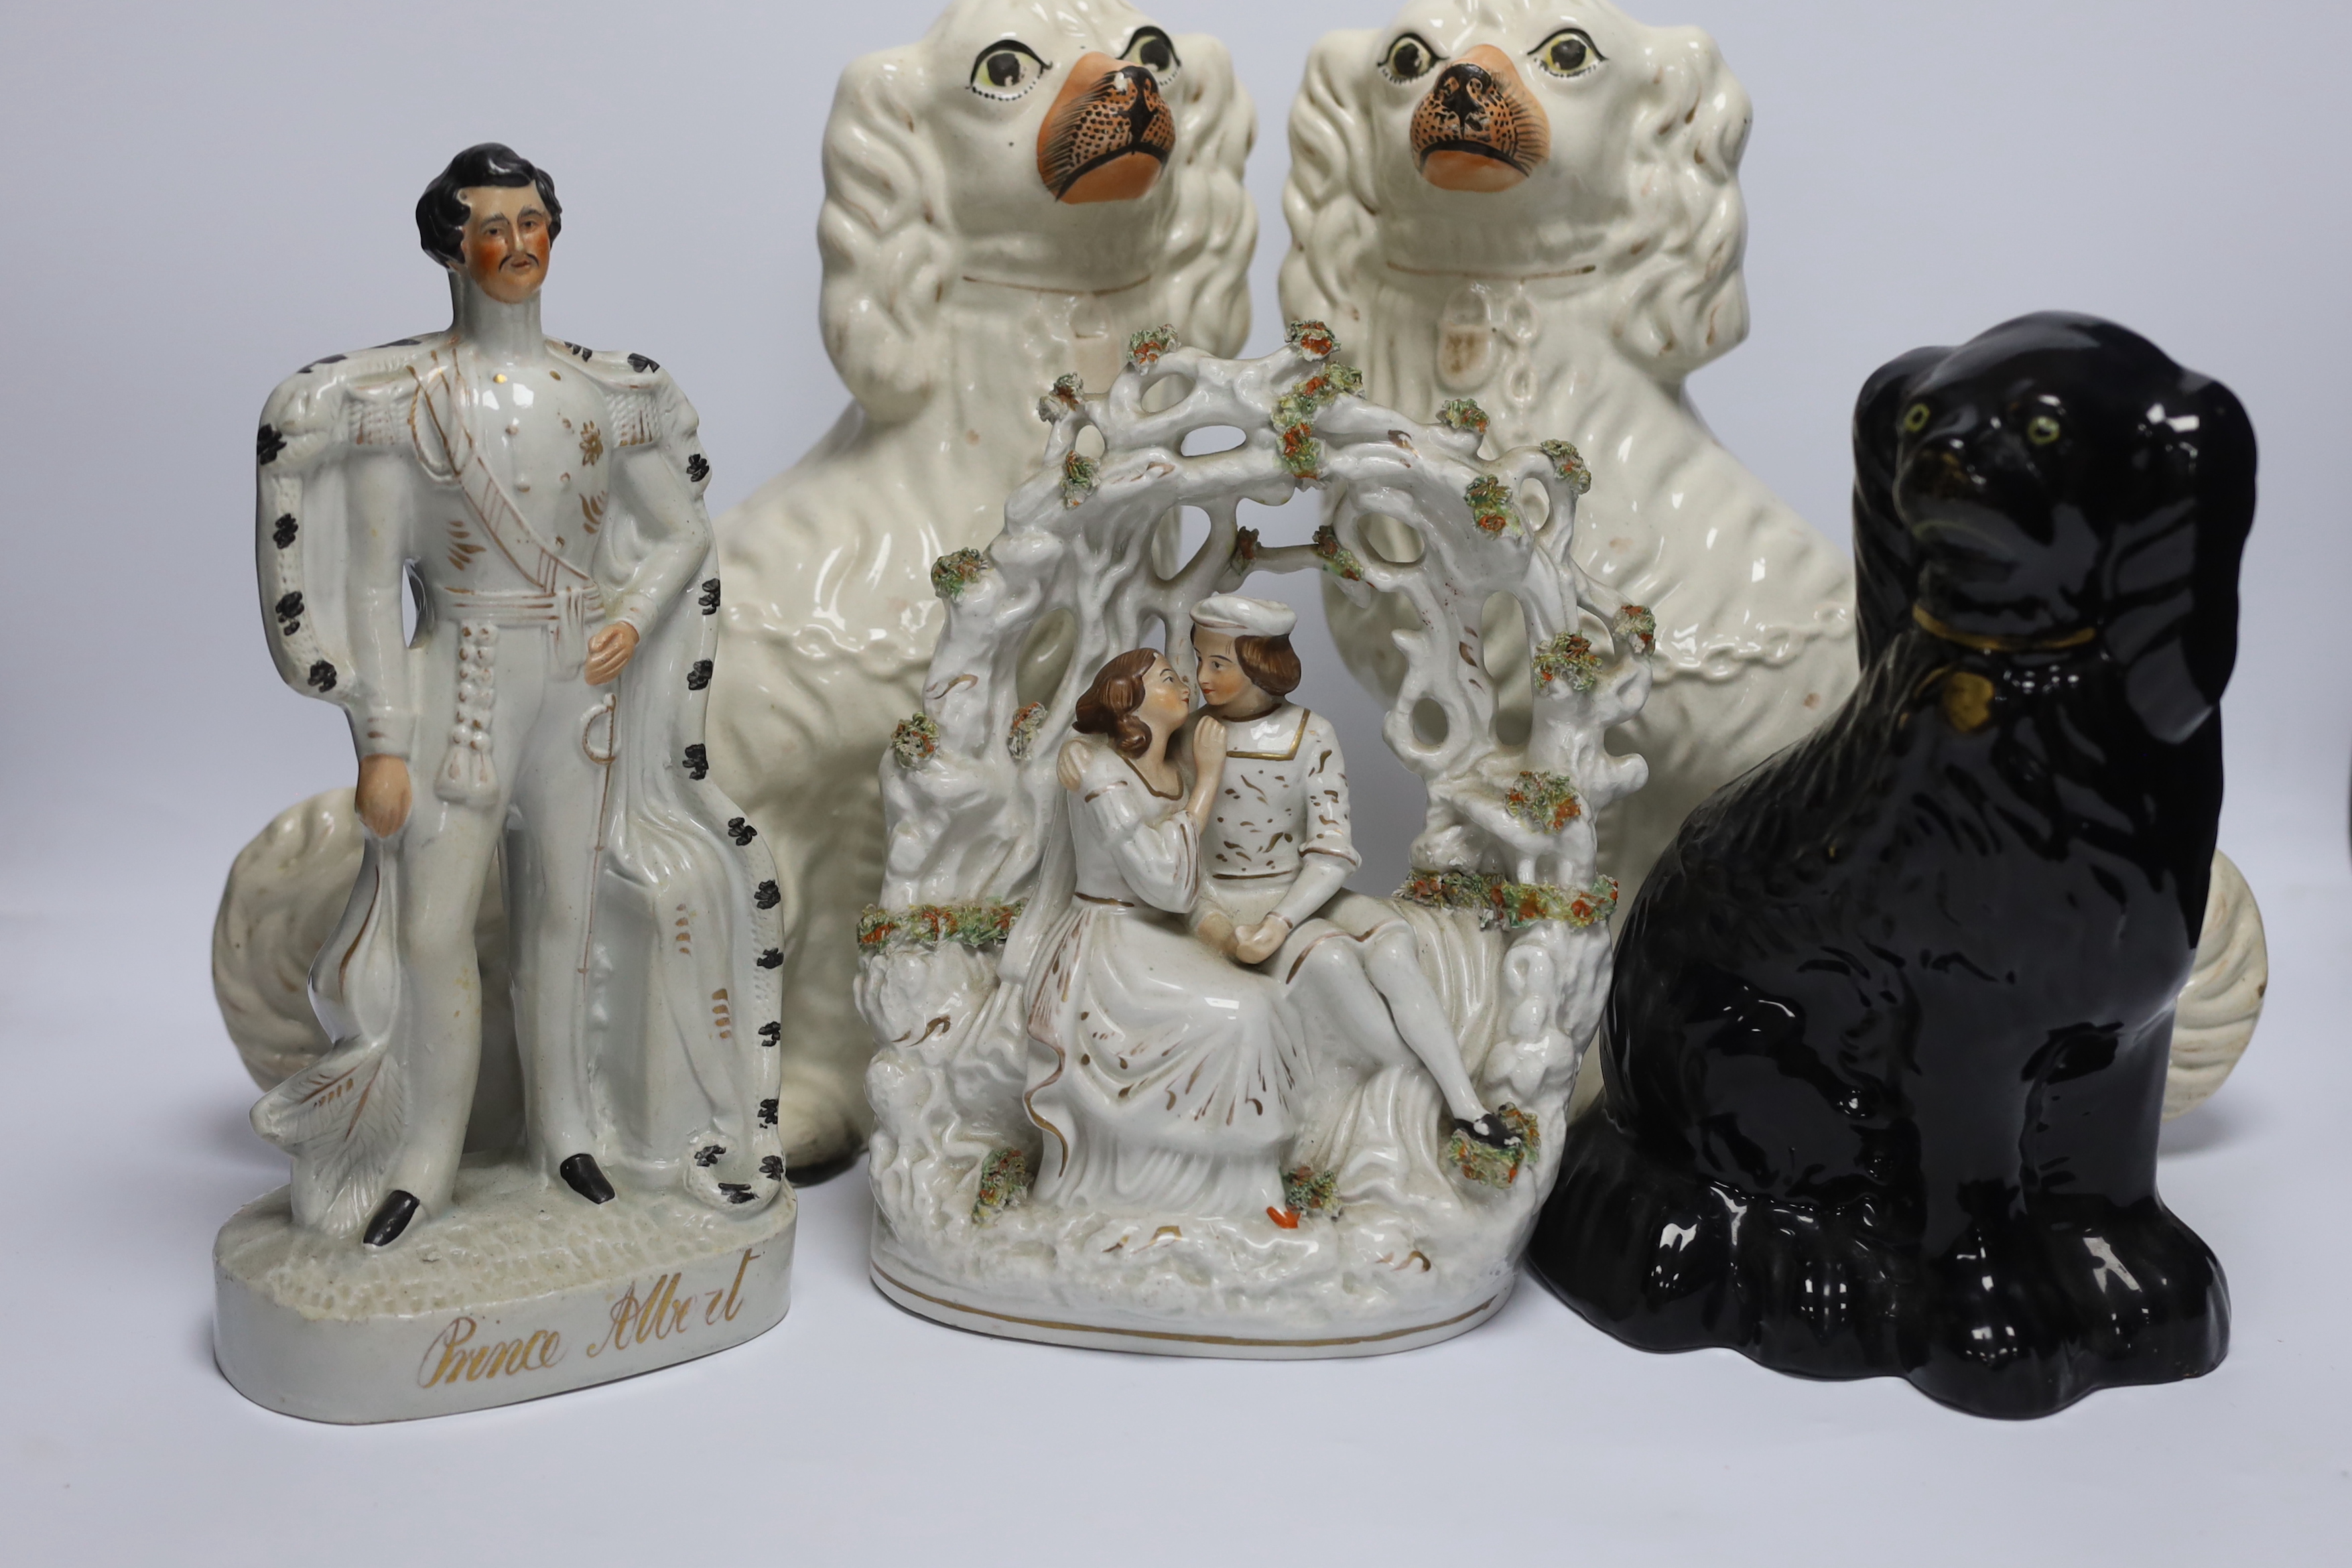 A mixed collection of Staffordshire figure groups to include various spaniels, a Prince Albert figure, courting couples and other bocage groups